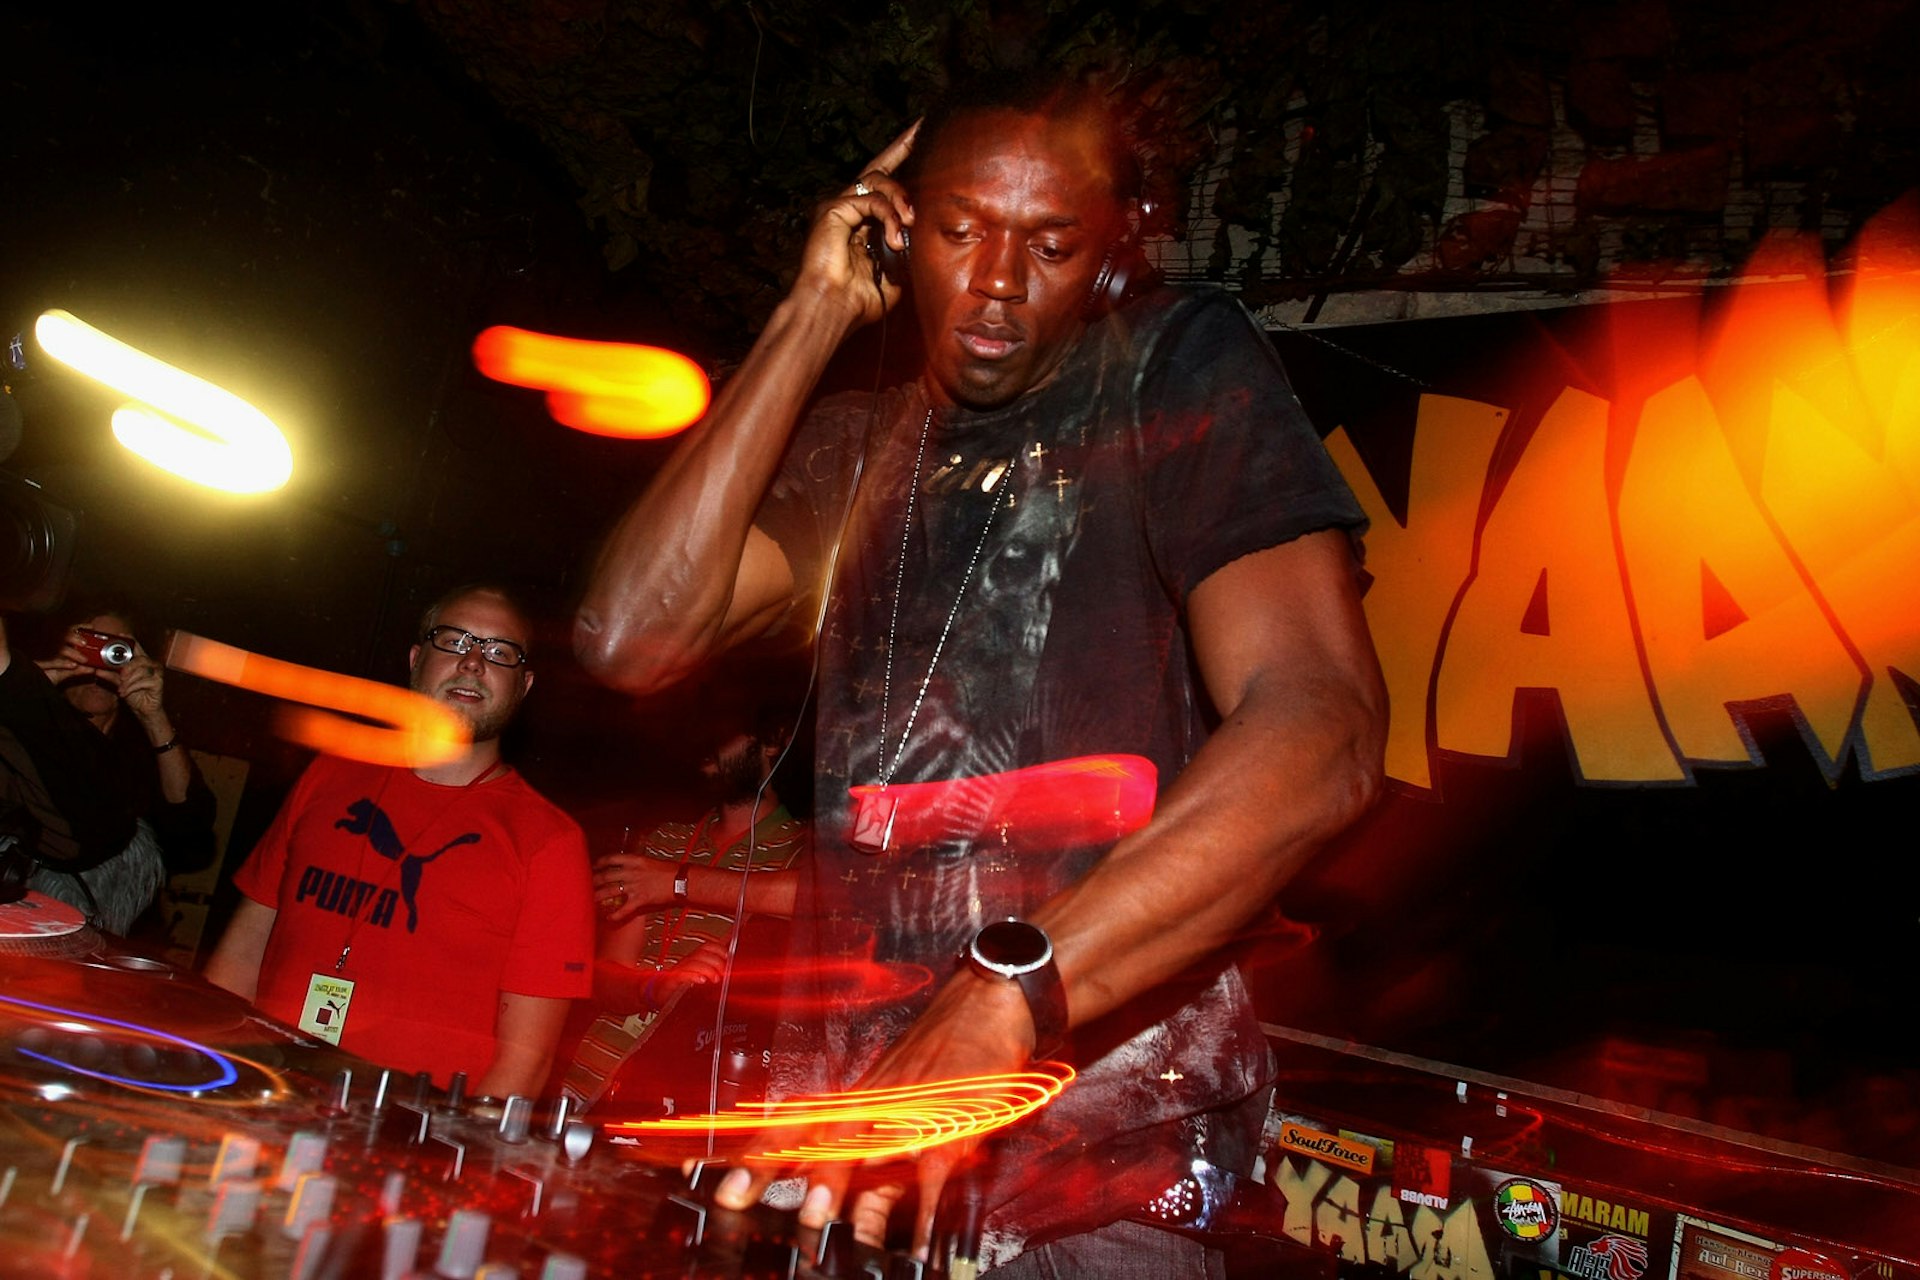 Berlin clubs - Usain Bolt celebrates his victories from the 12th IAAF World Championships in Berlin at the PUMA Party held at the Yaam Club. Bolt is at a DJ deck, touching his headphones with one hand